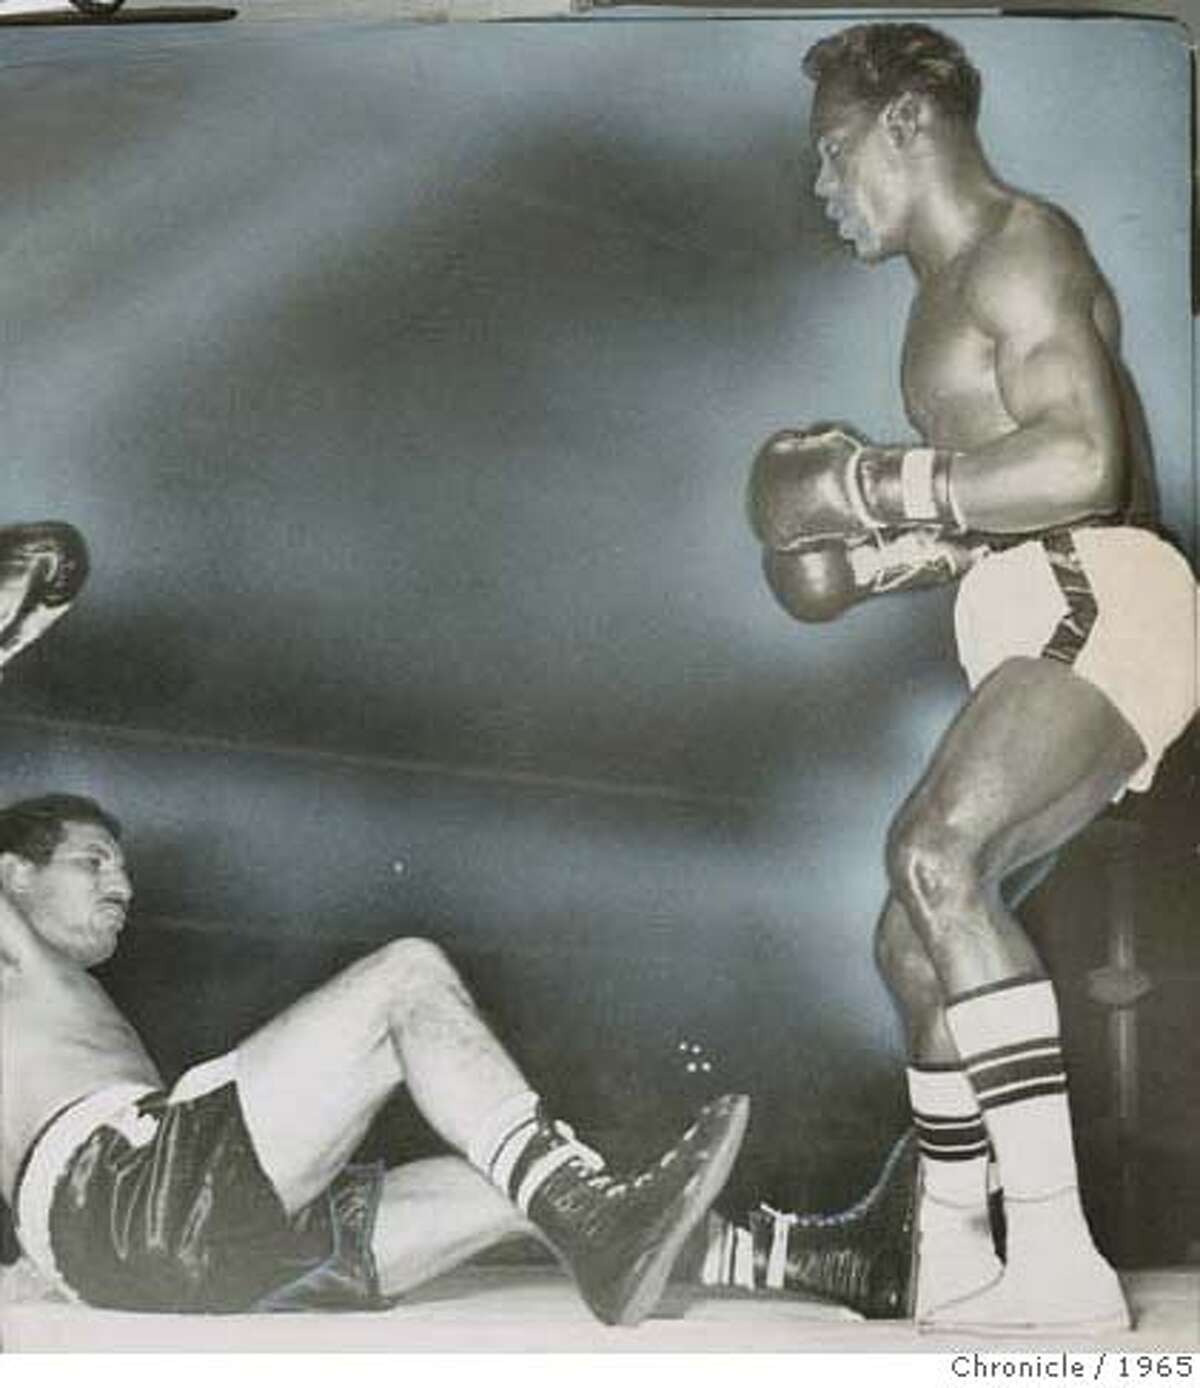 Jimmy Lester knocks down Florentino Fernandez at Kezar Pavillion, 10/20/1965 MANDATORY CREDIT FOR PHOTOG AND SF CHRONICLE/ -MAGS OUT